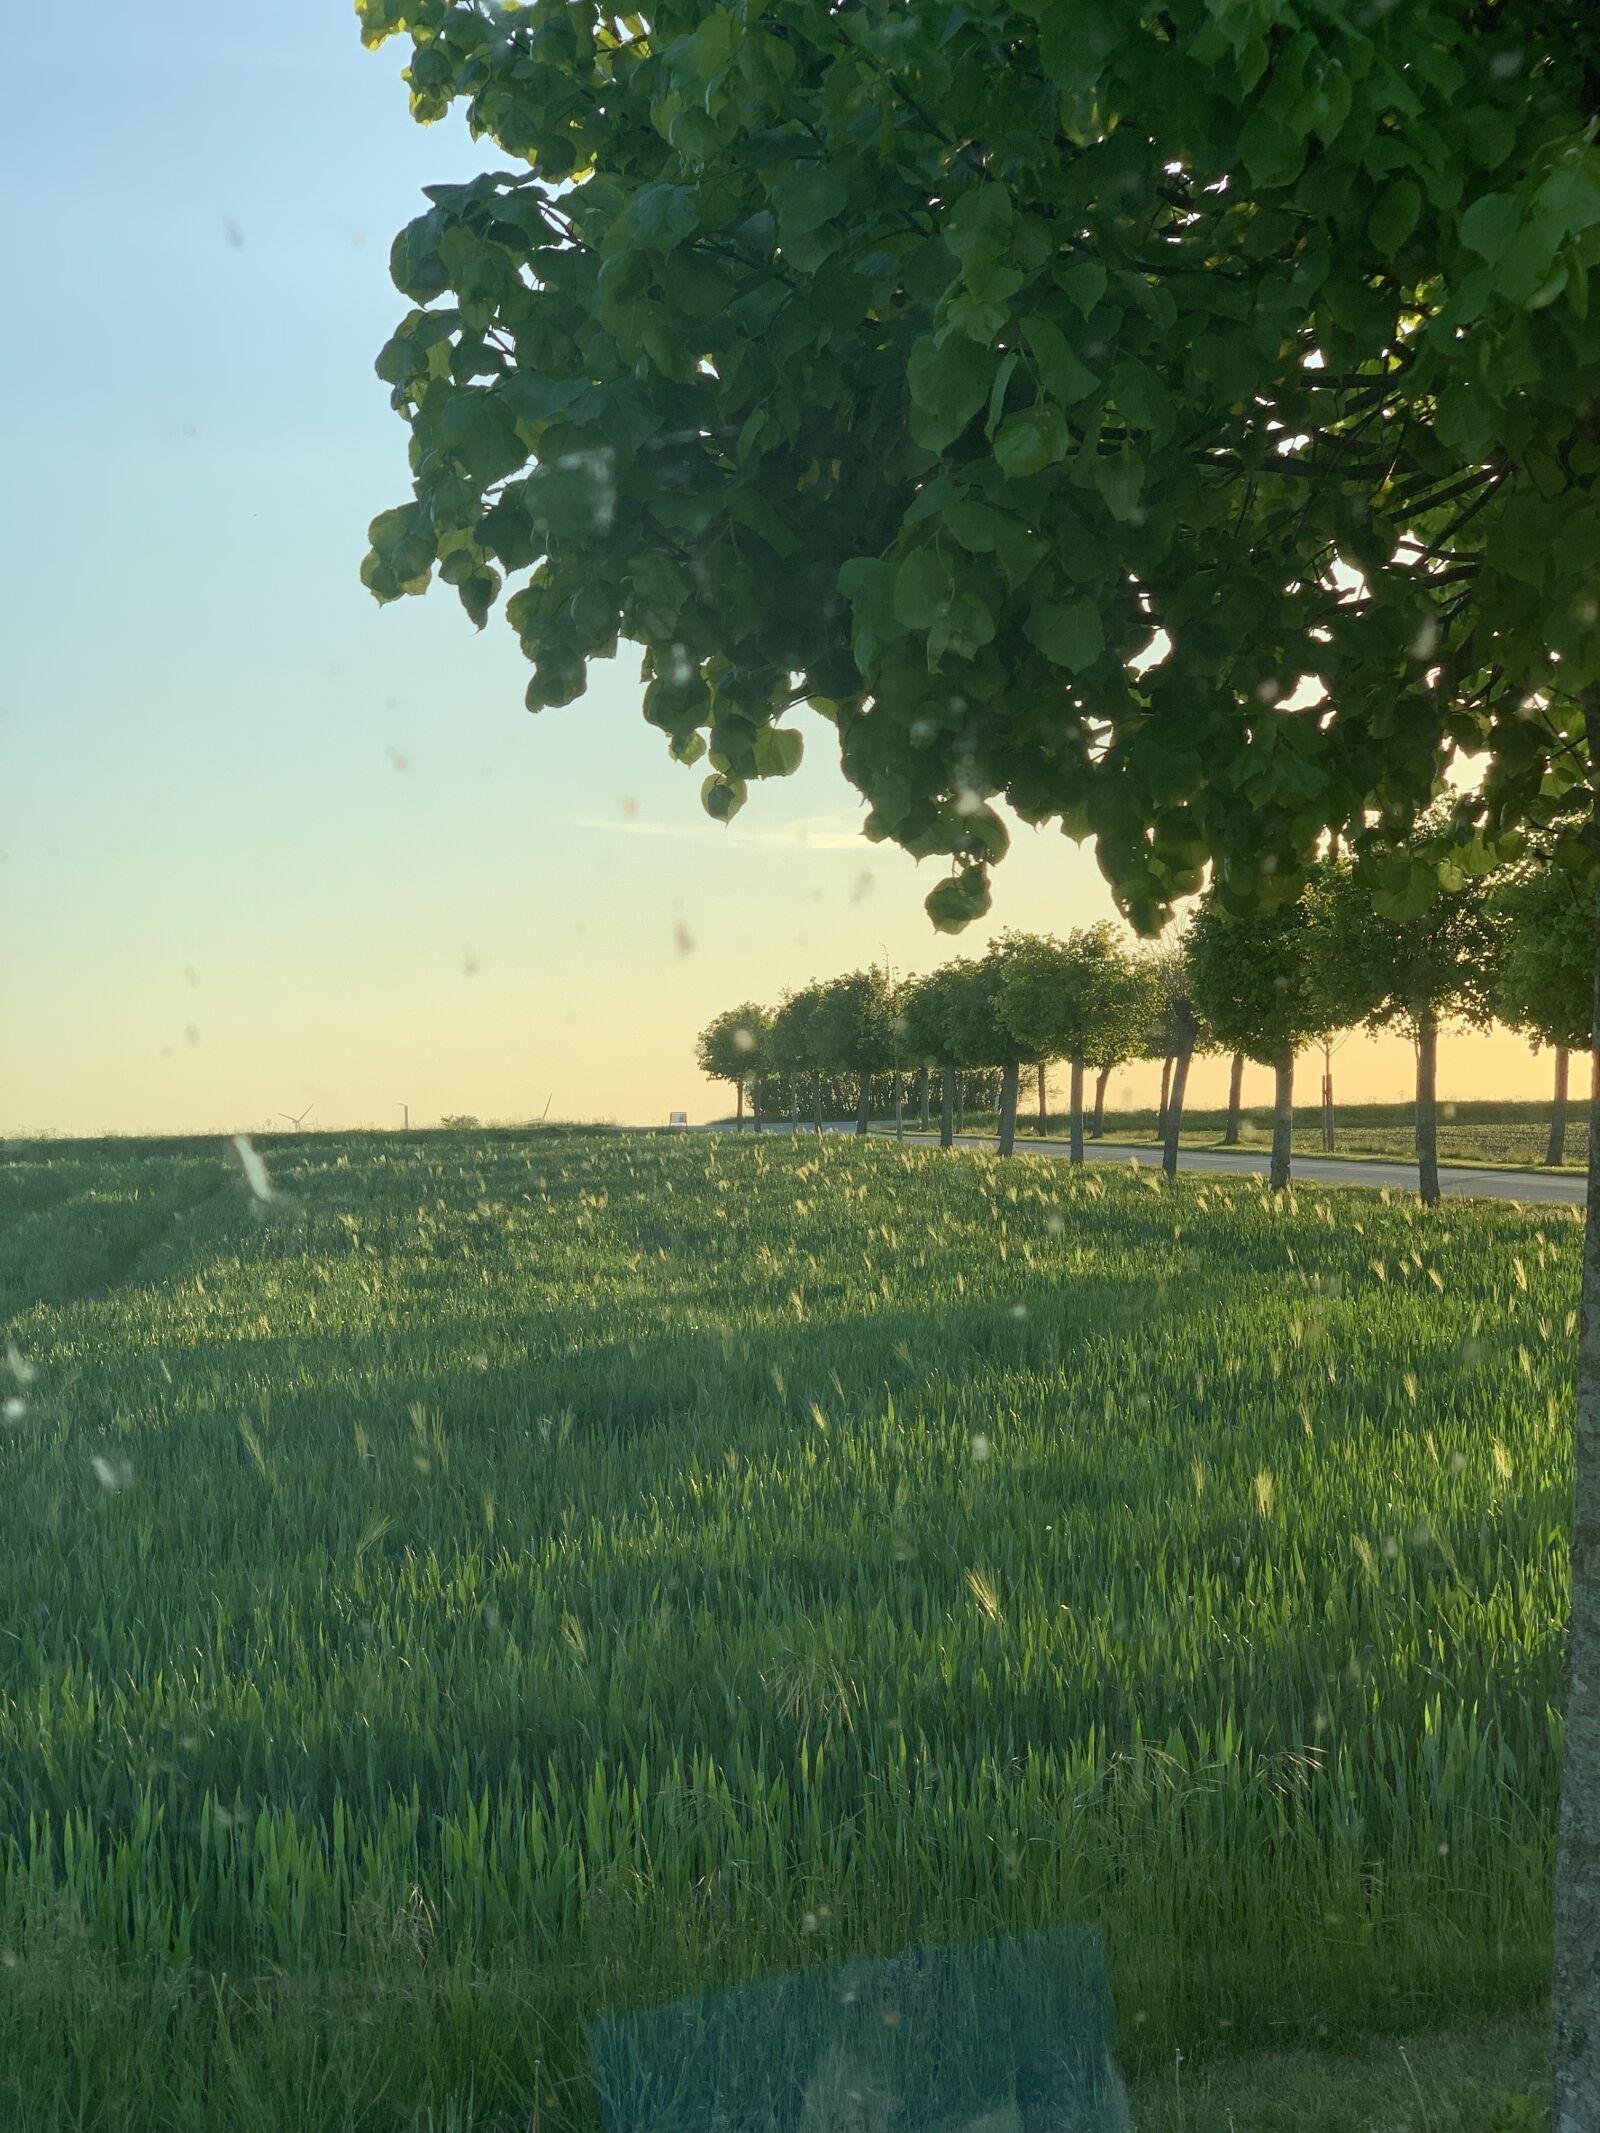 Apple iPhone XS Max + iPhone XS Max back dual camera 6mm f/2.4 sample photo. Denmark, sunset, tree photography